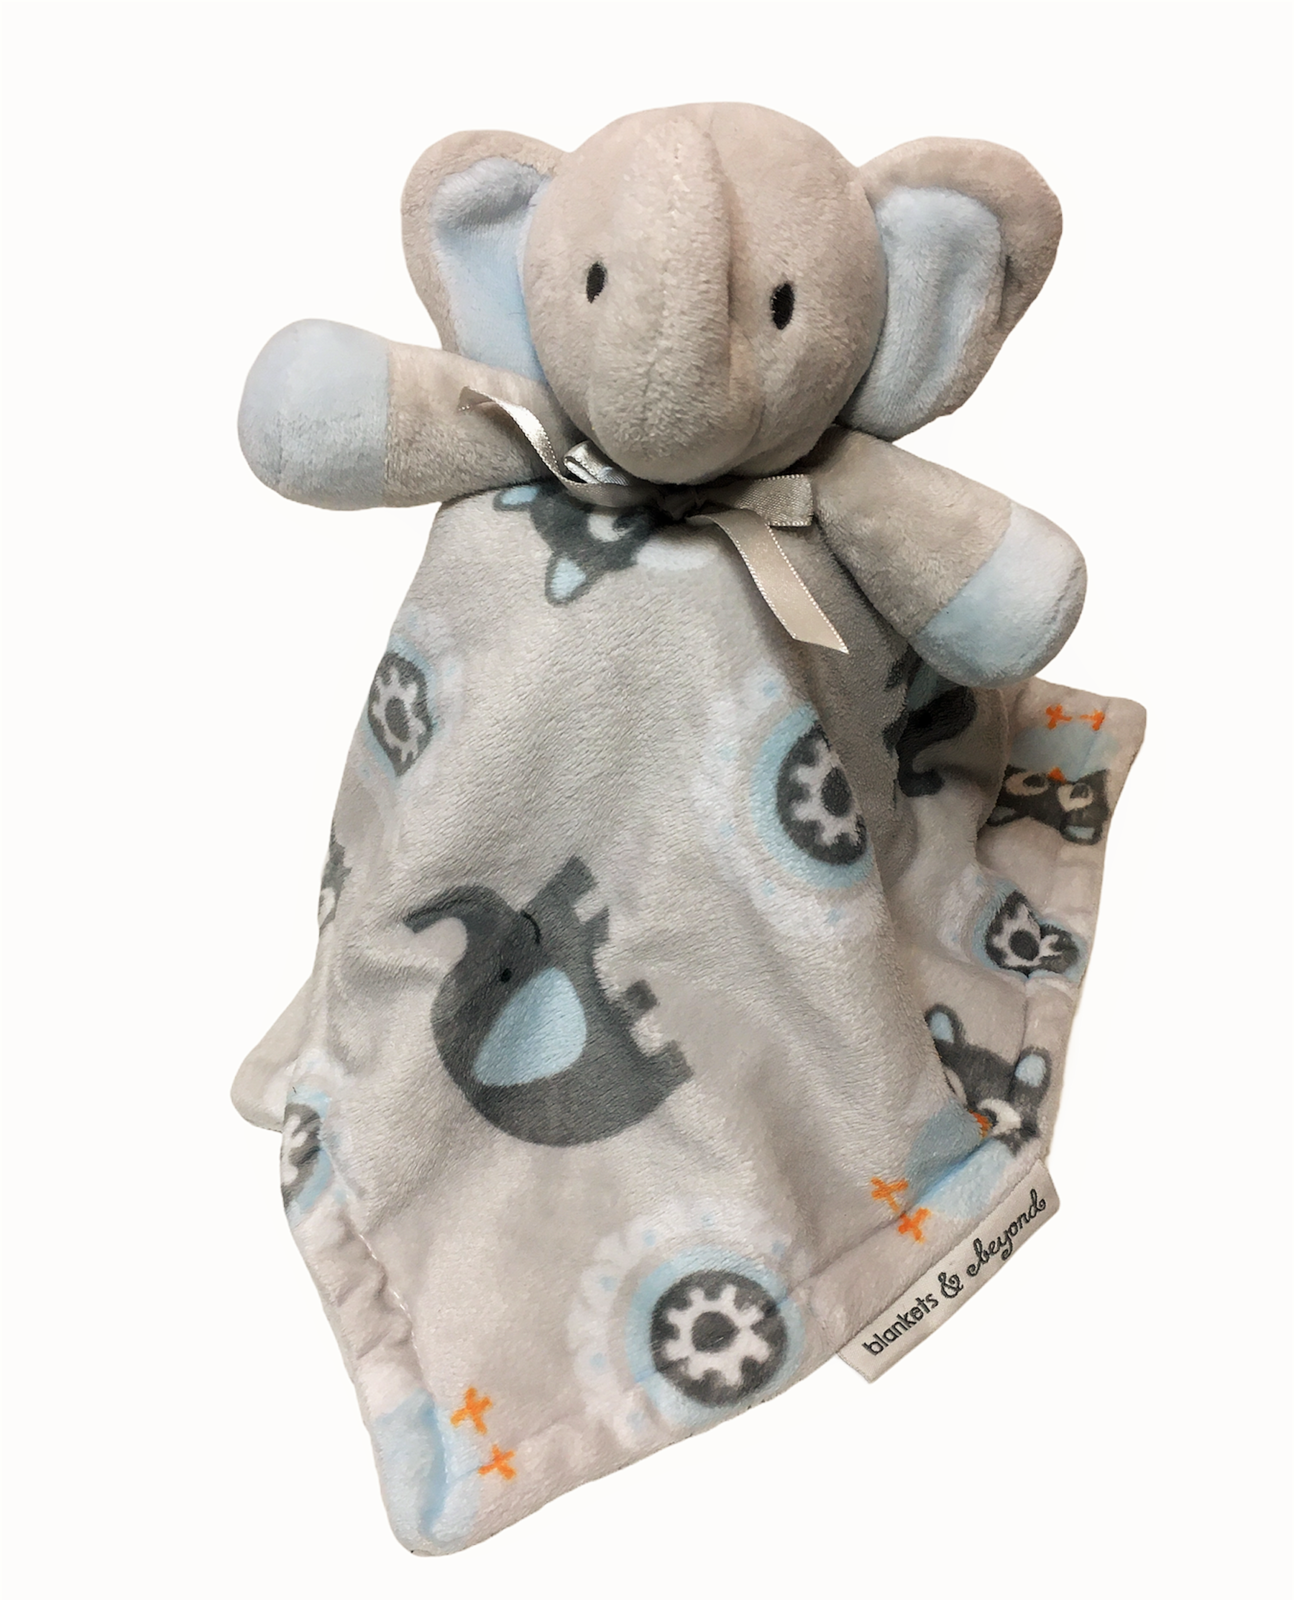 Primary image for Blankets and & Beyond Elephant Owl Blue Gray Baby Blanket Security Lovey 14"